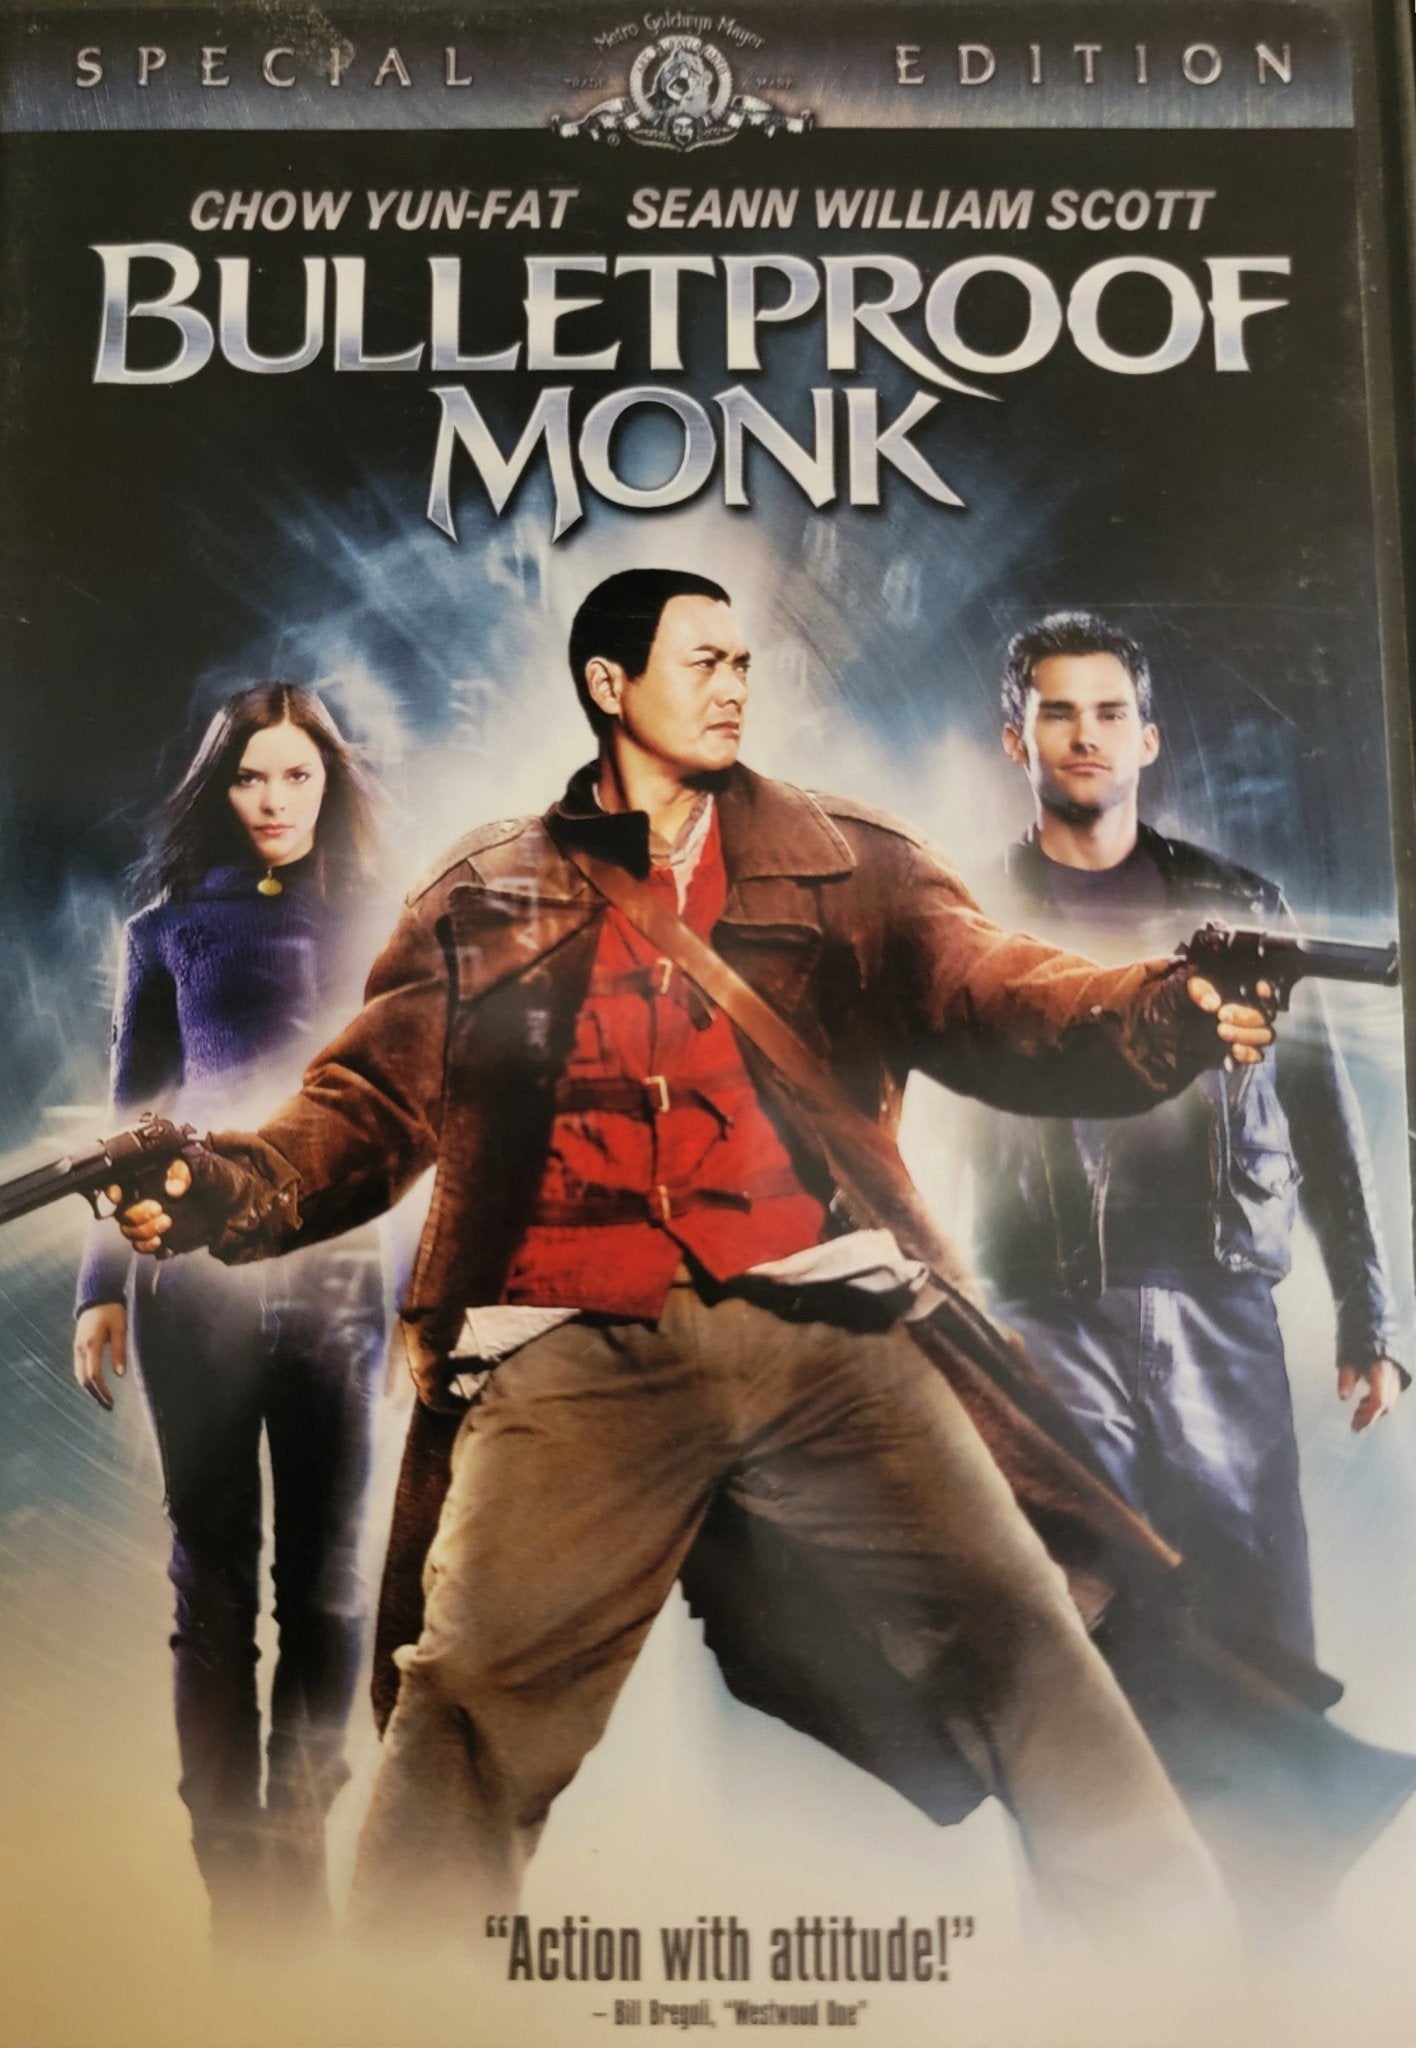 MGM - Bulletproof Monk | DVD | Special Edition Widescreen - DVD - Steady Bunny Shop